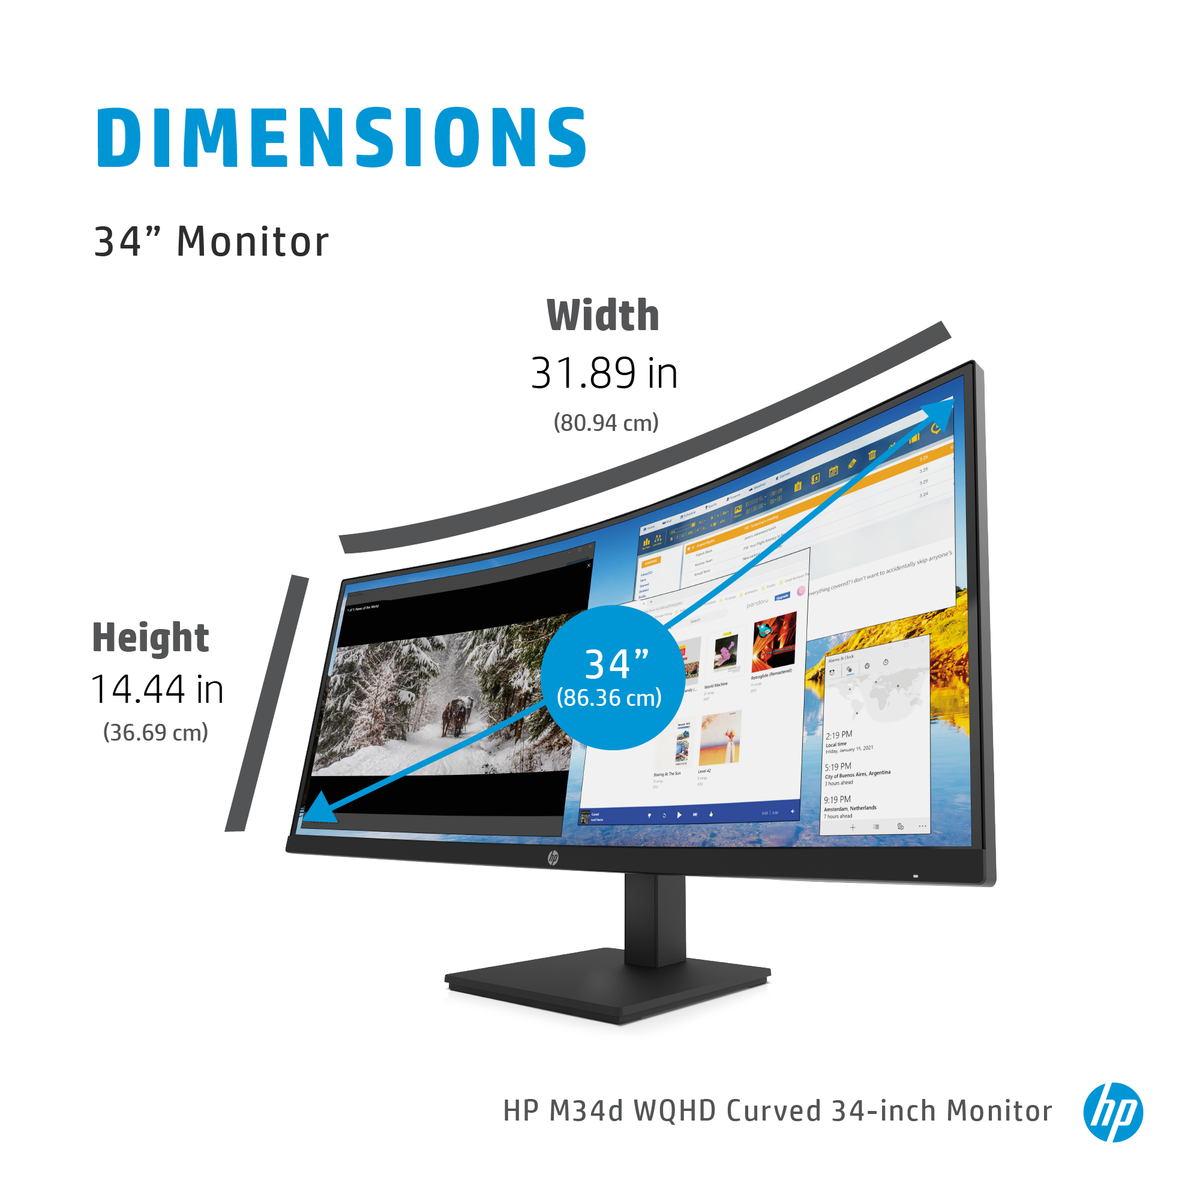 slide 2 of 7, show larger image, hp m34d wqhd curved monitor